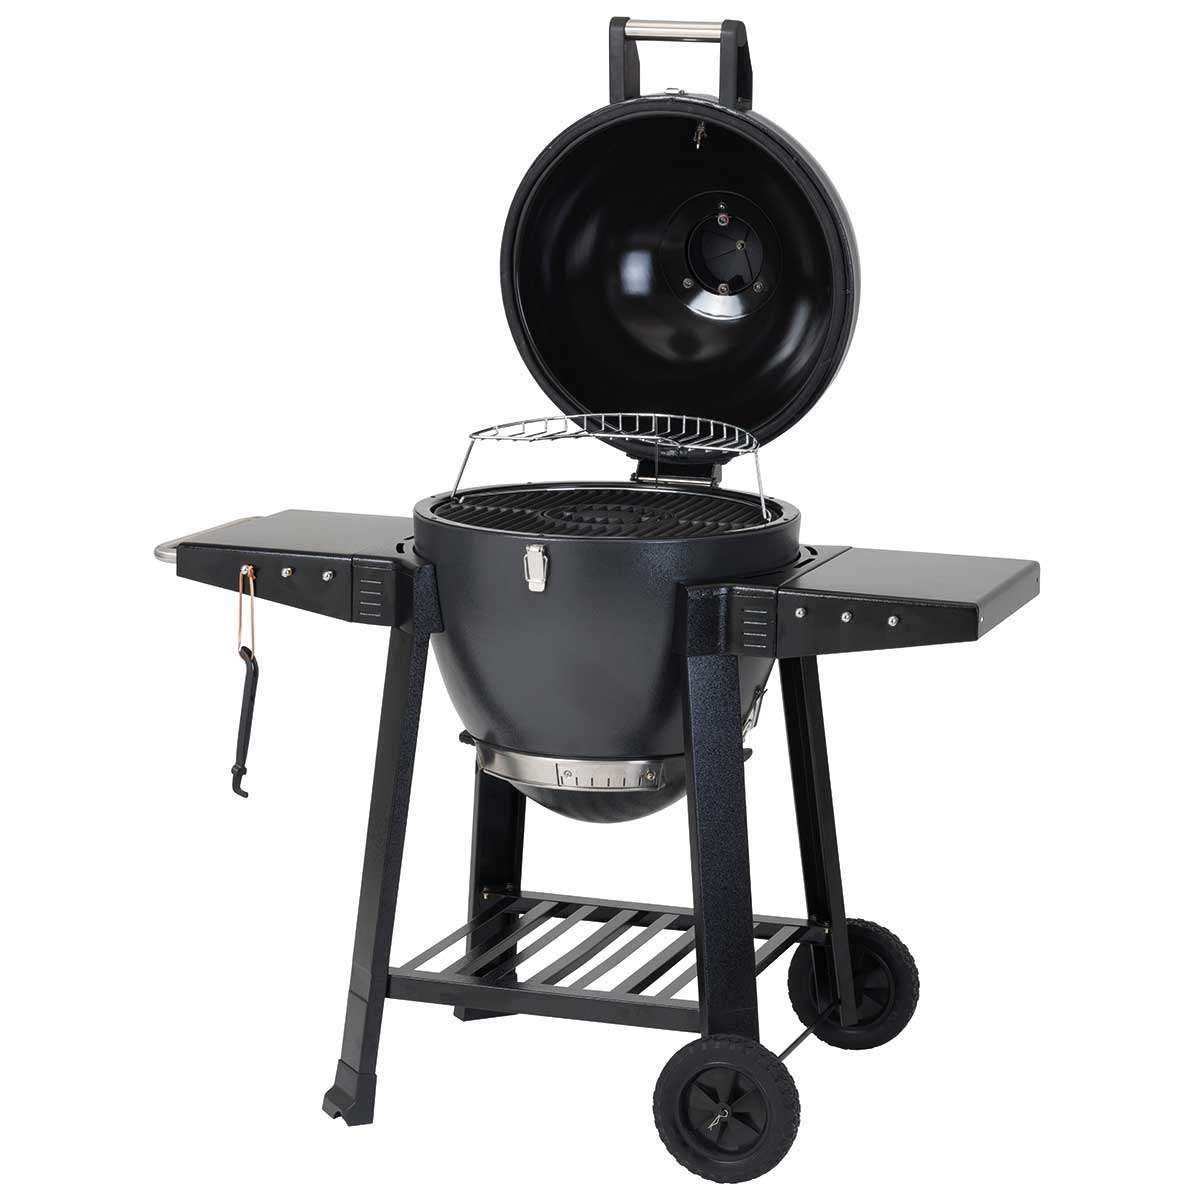 Exceptional Garden:Lifestyle Dragon Egg Charcoal Barbeques